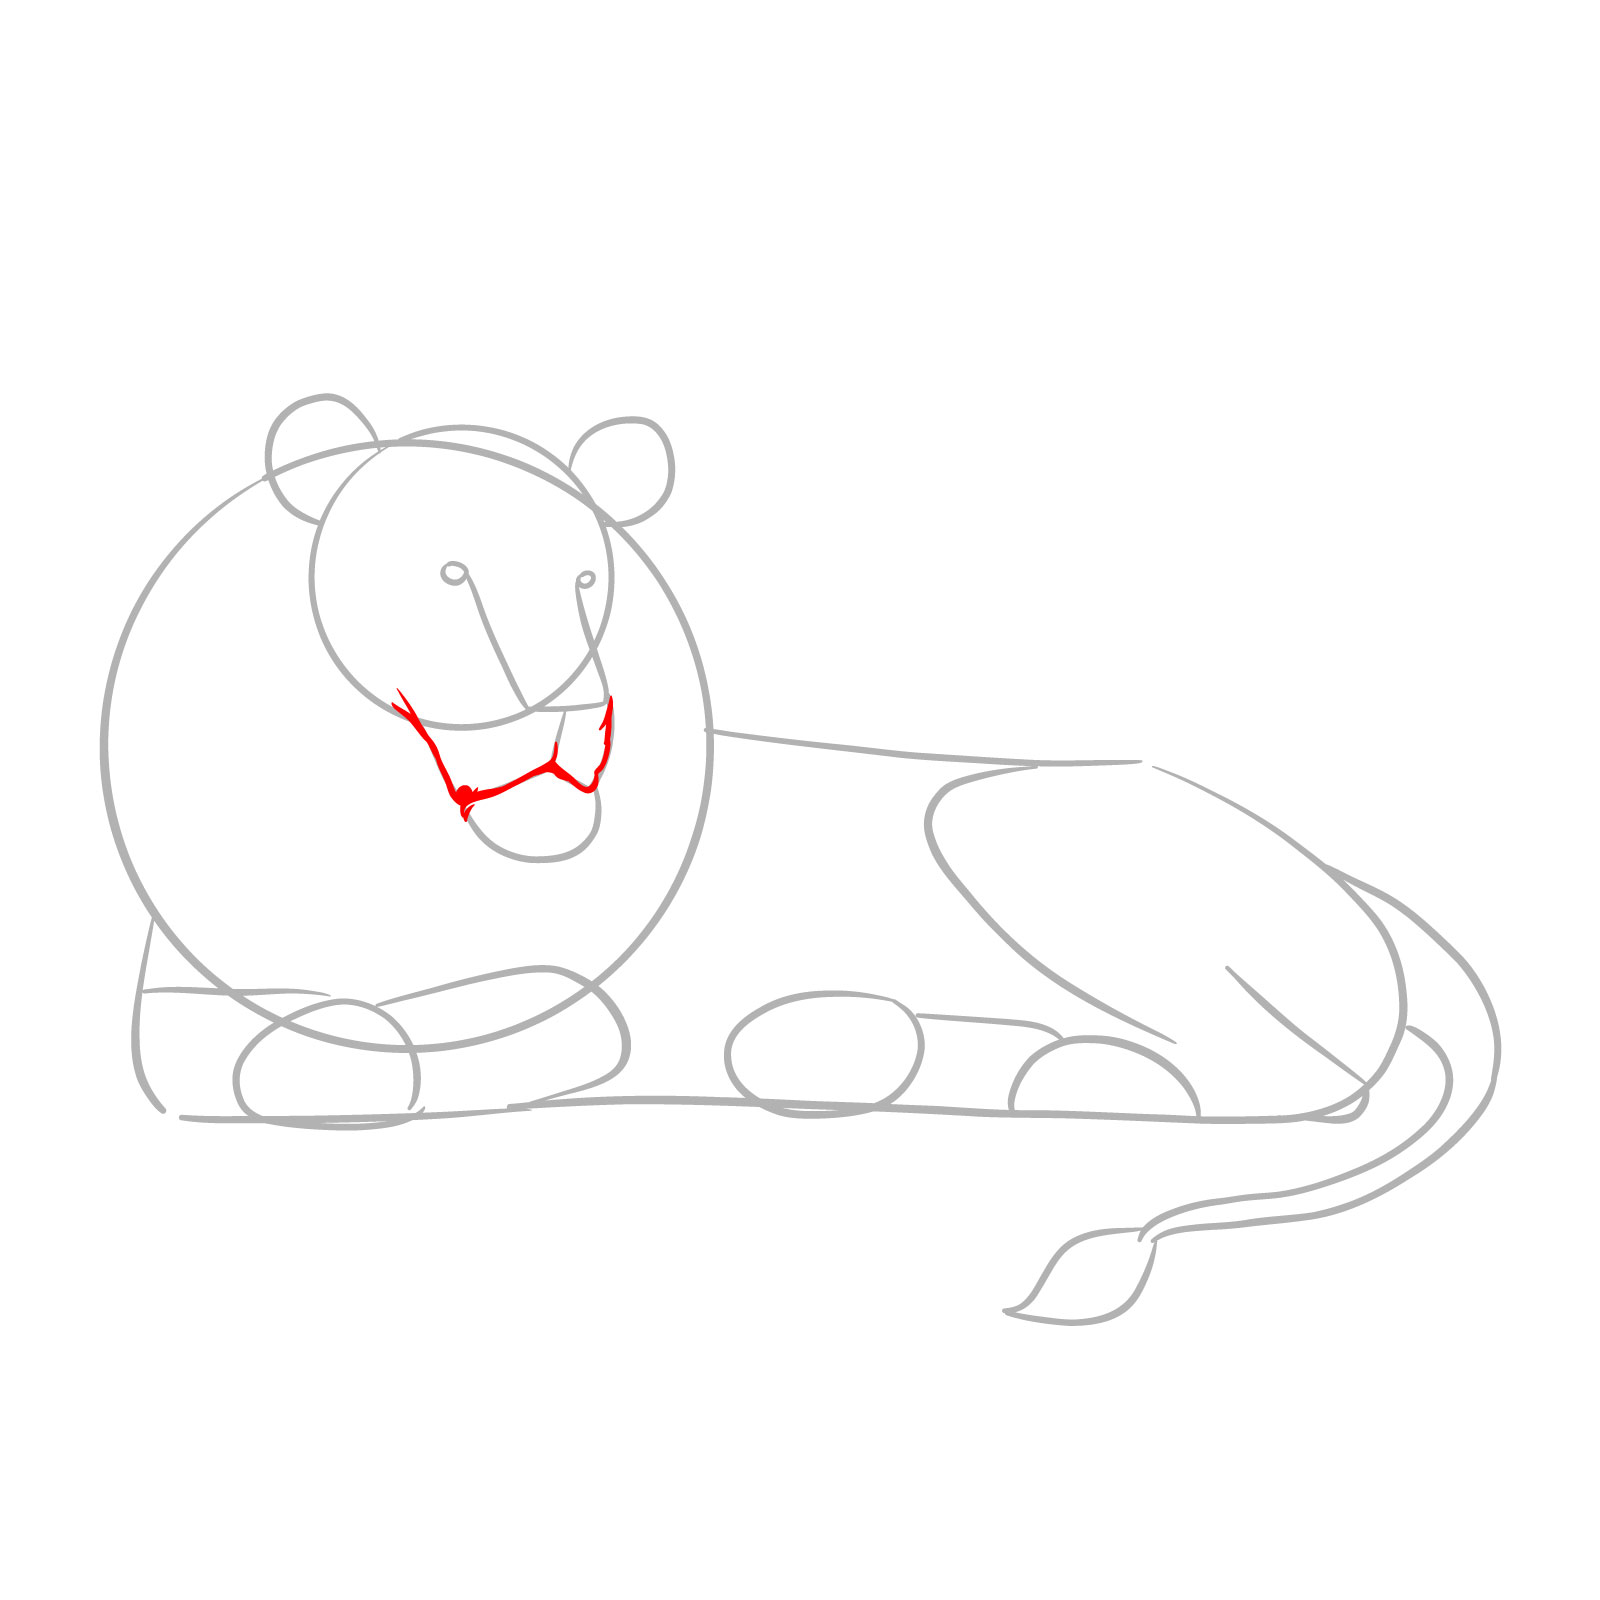 How to draw a lying lion in side view - Step 3: Sketching the lion's muzzle